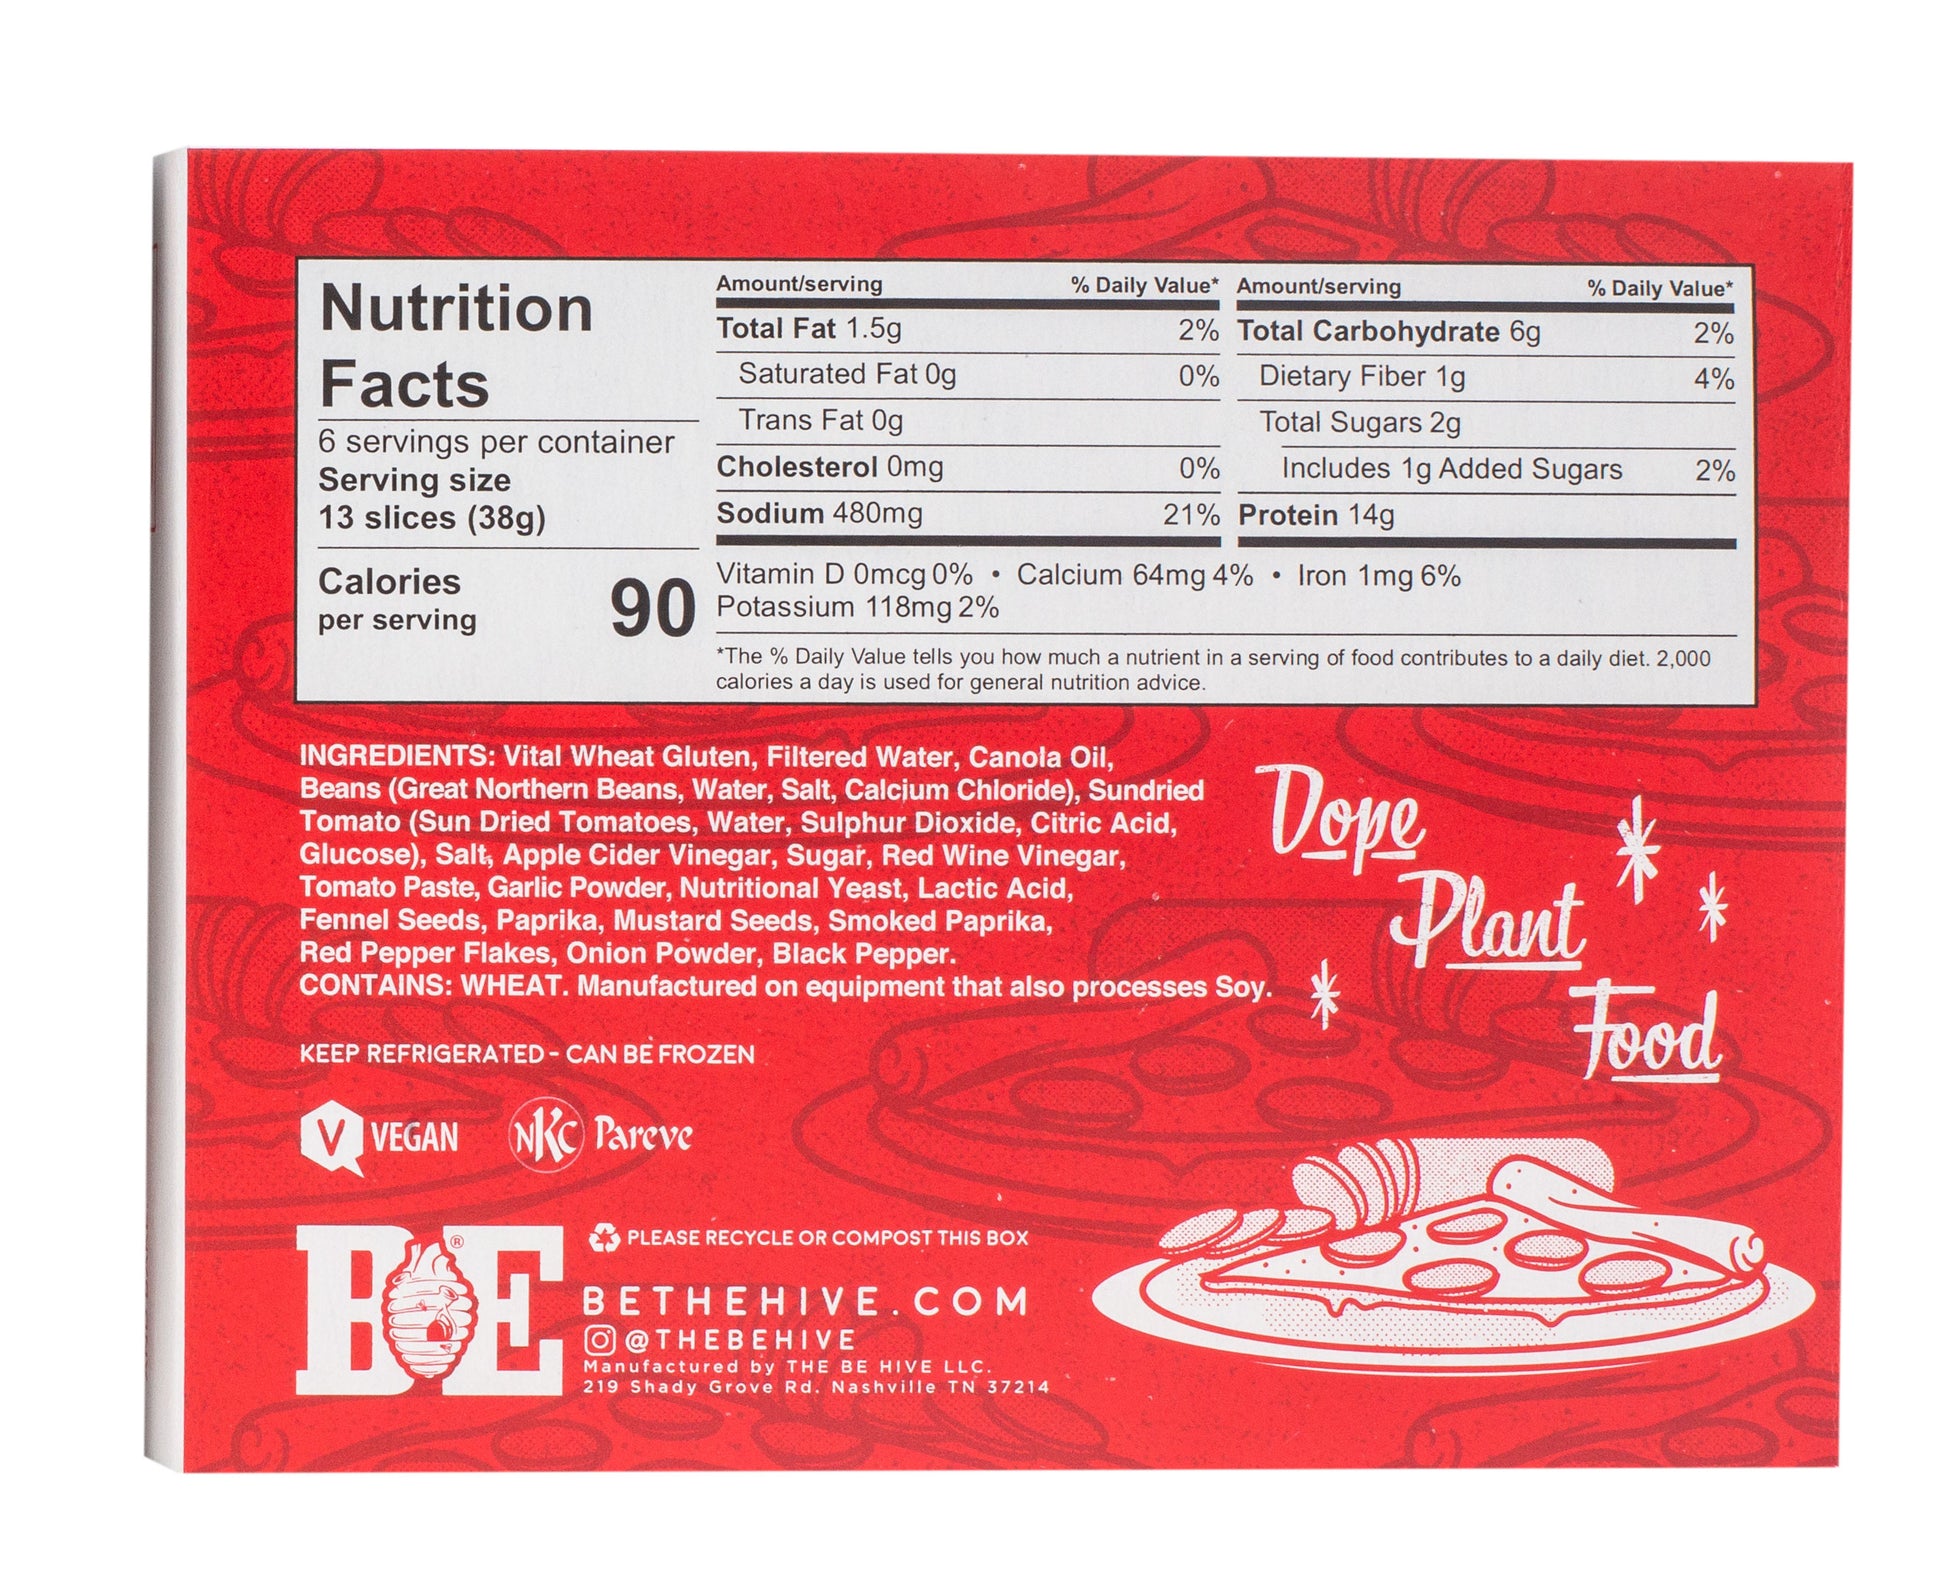 Vegan pepperoni nutrition facts image